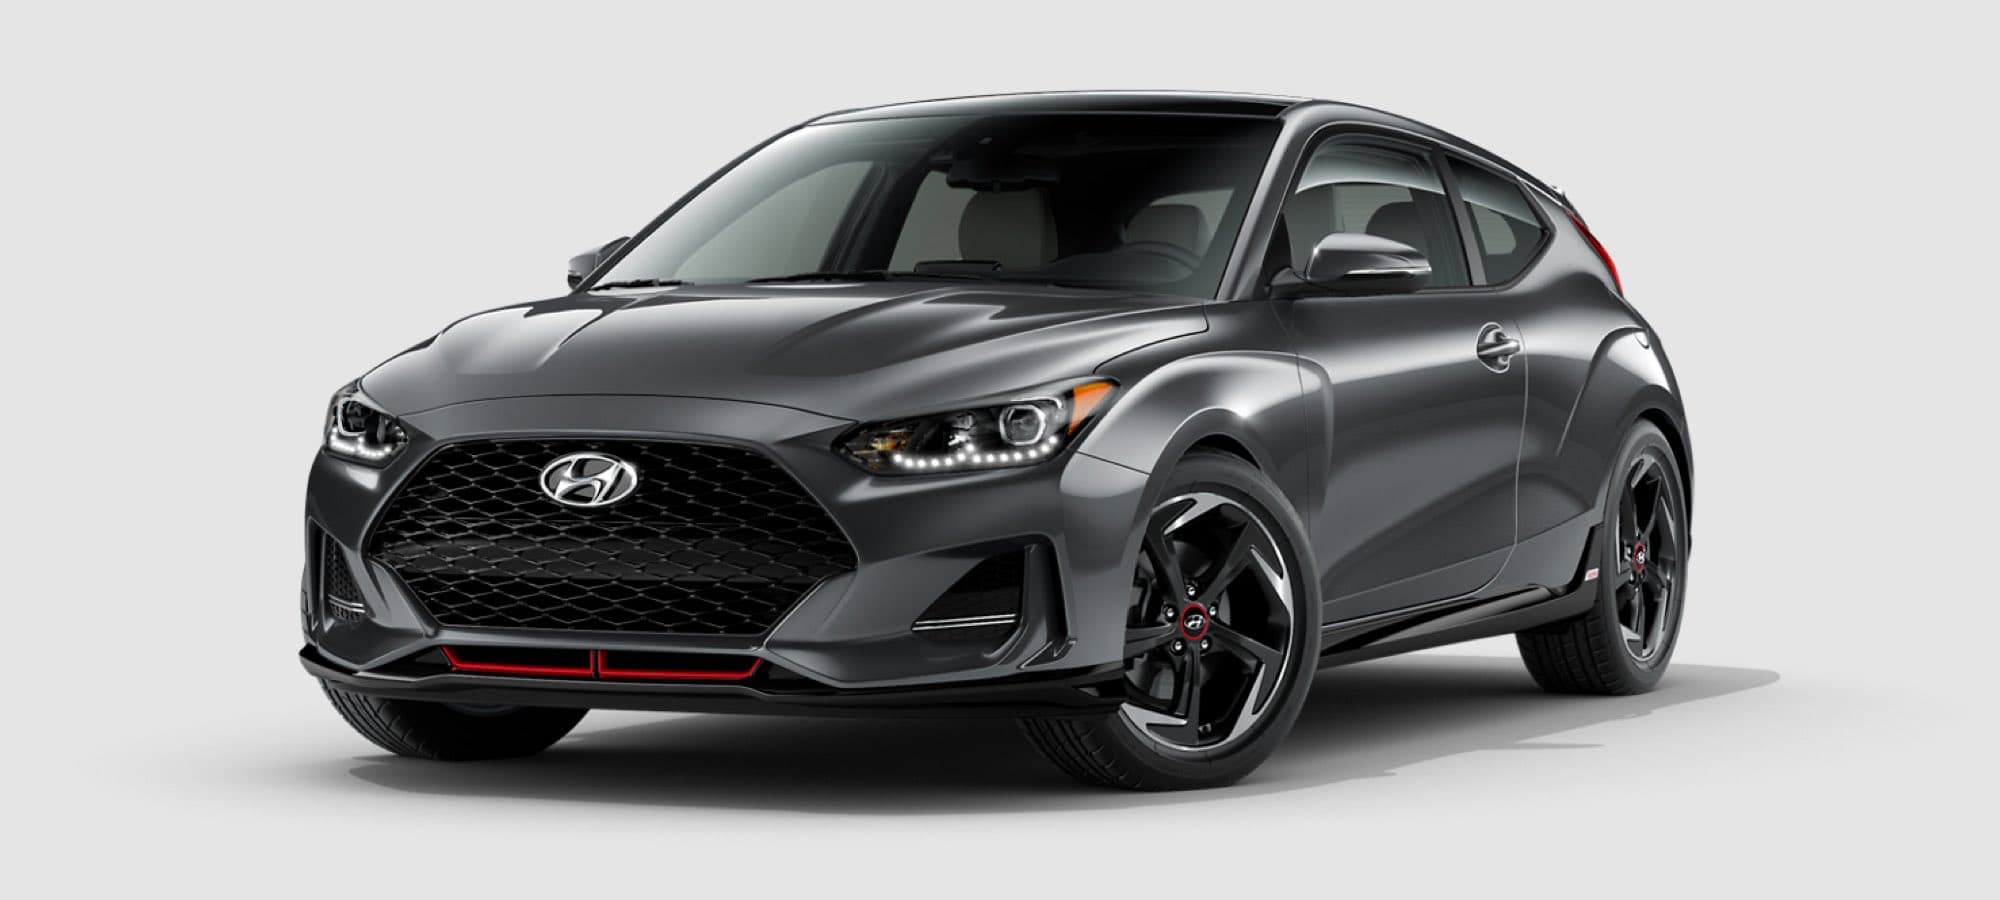 2021 Hyundai Veloster Colors, Price, Specs | Norm Reeves Hyundai Superstore